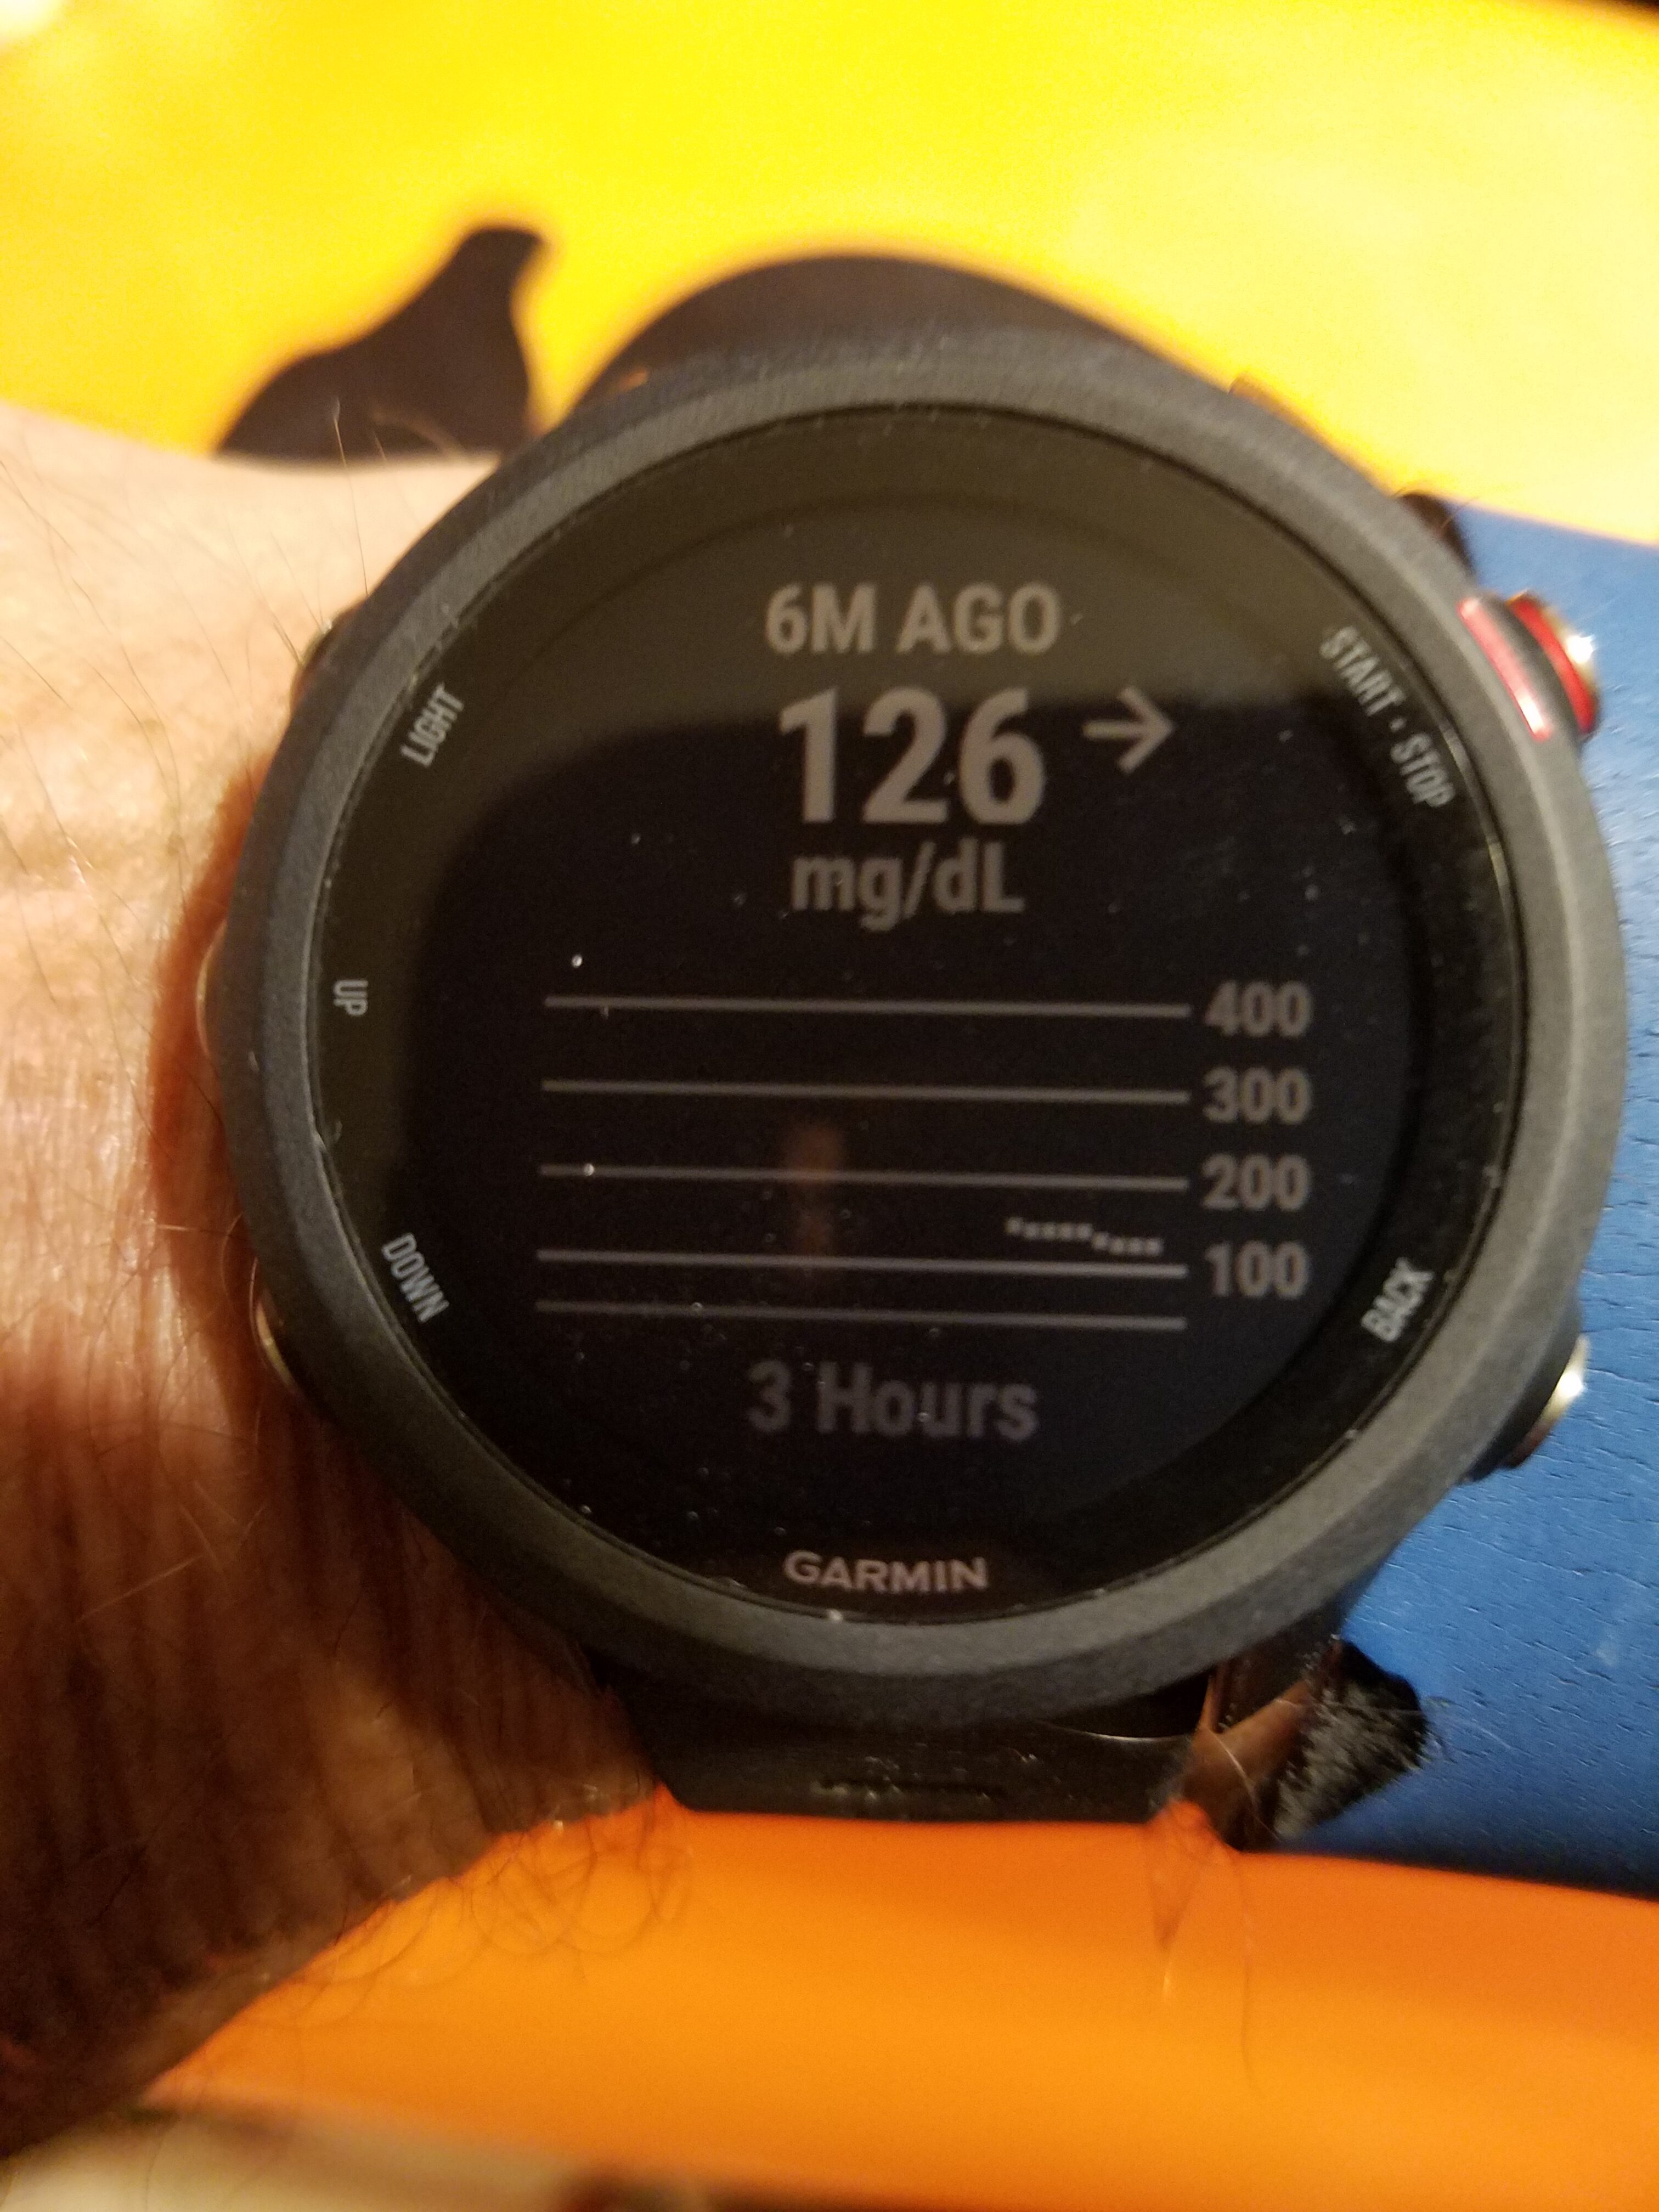 Garmin face with Dexcom numbers